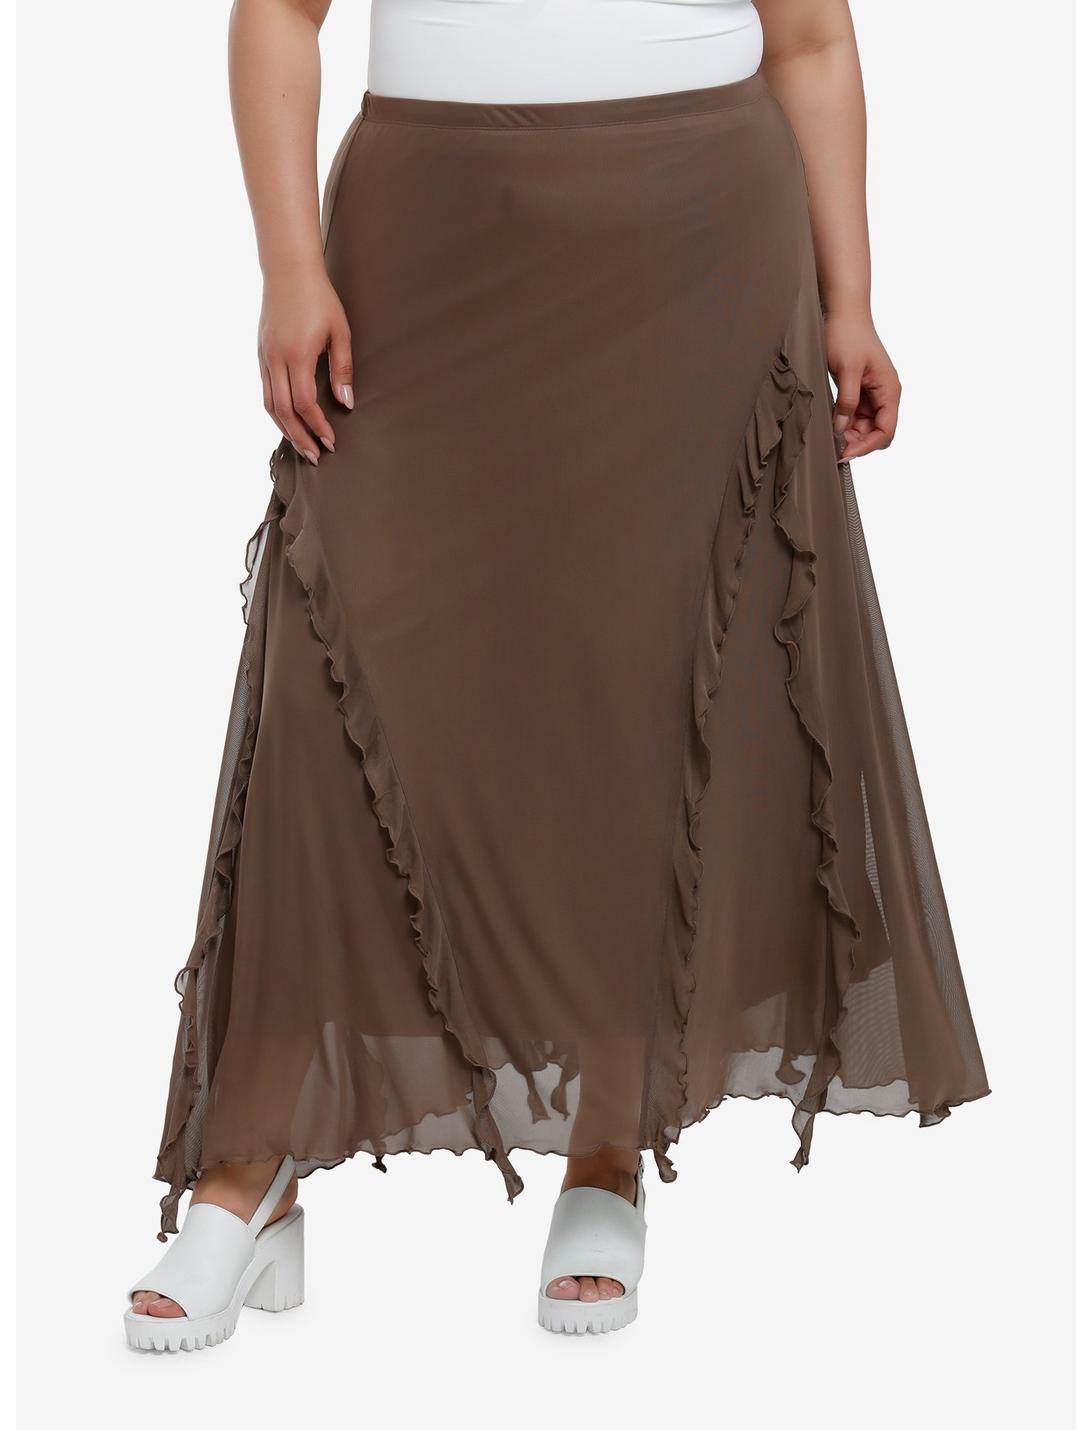 Thorn & Fable Brown Ruffle Maxi Skirt Plus Size, BROWN, hi-res